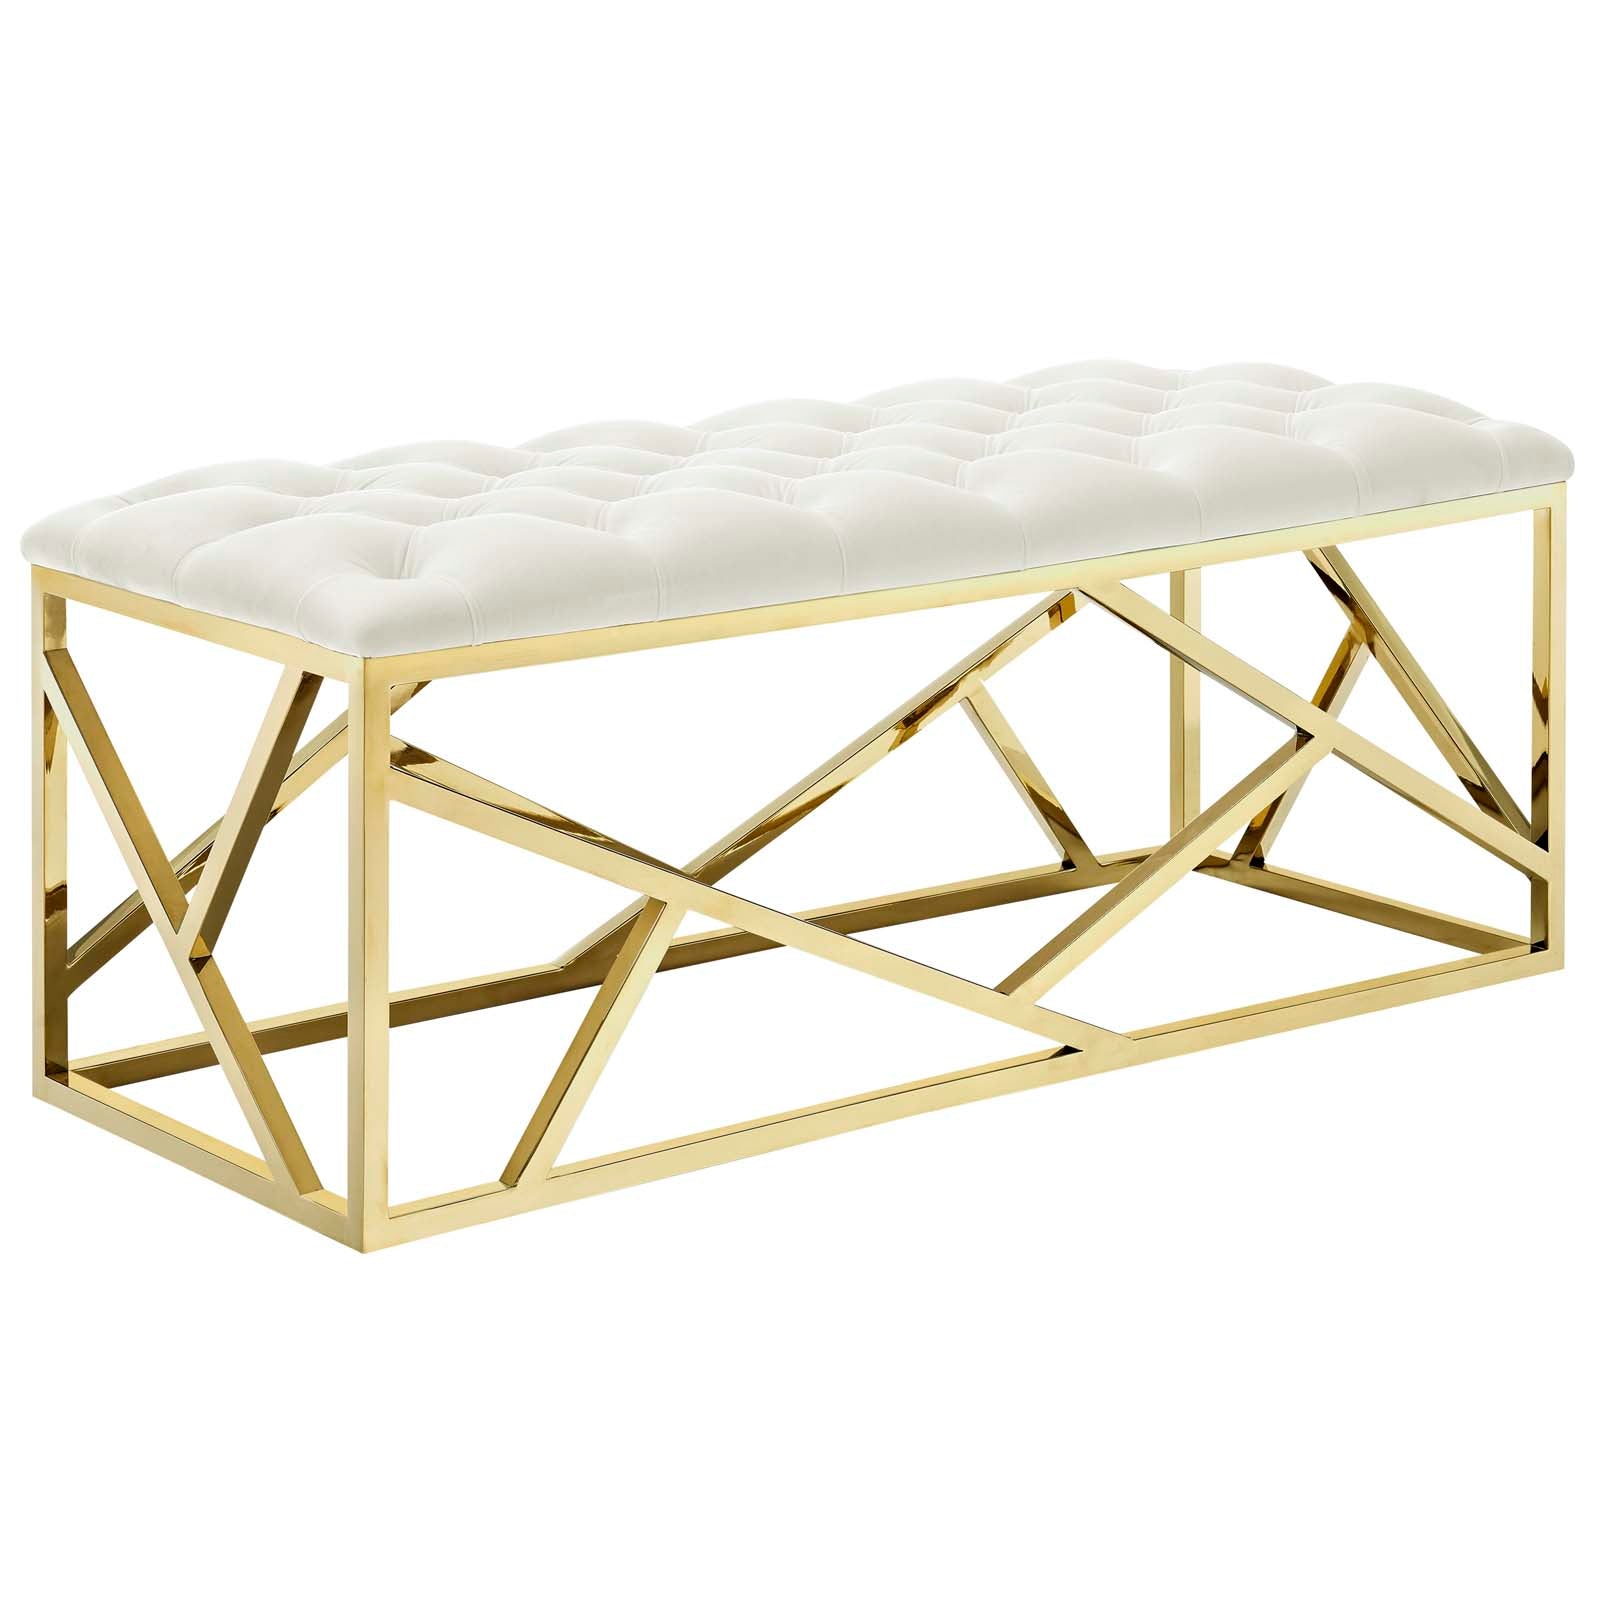 Modway Benches - Intersperse Bench Gold Ivory